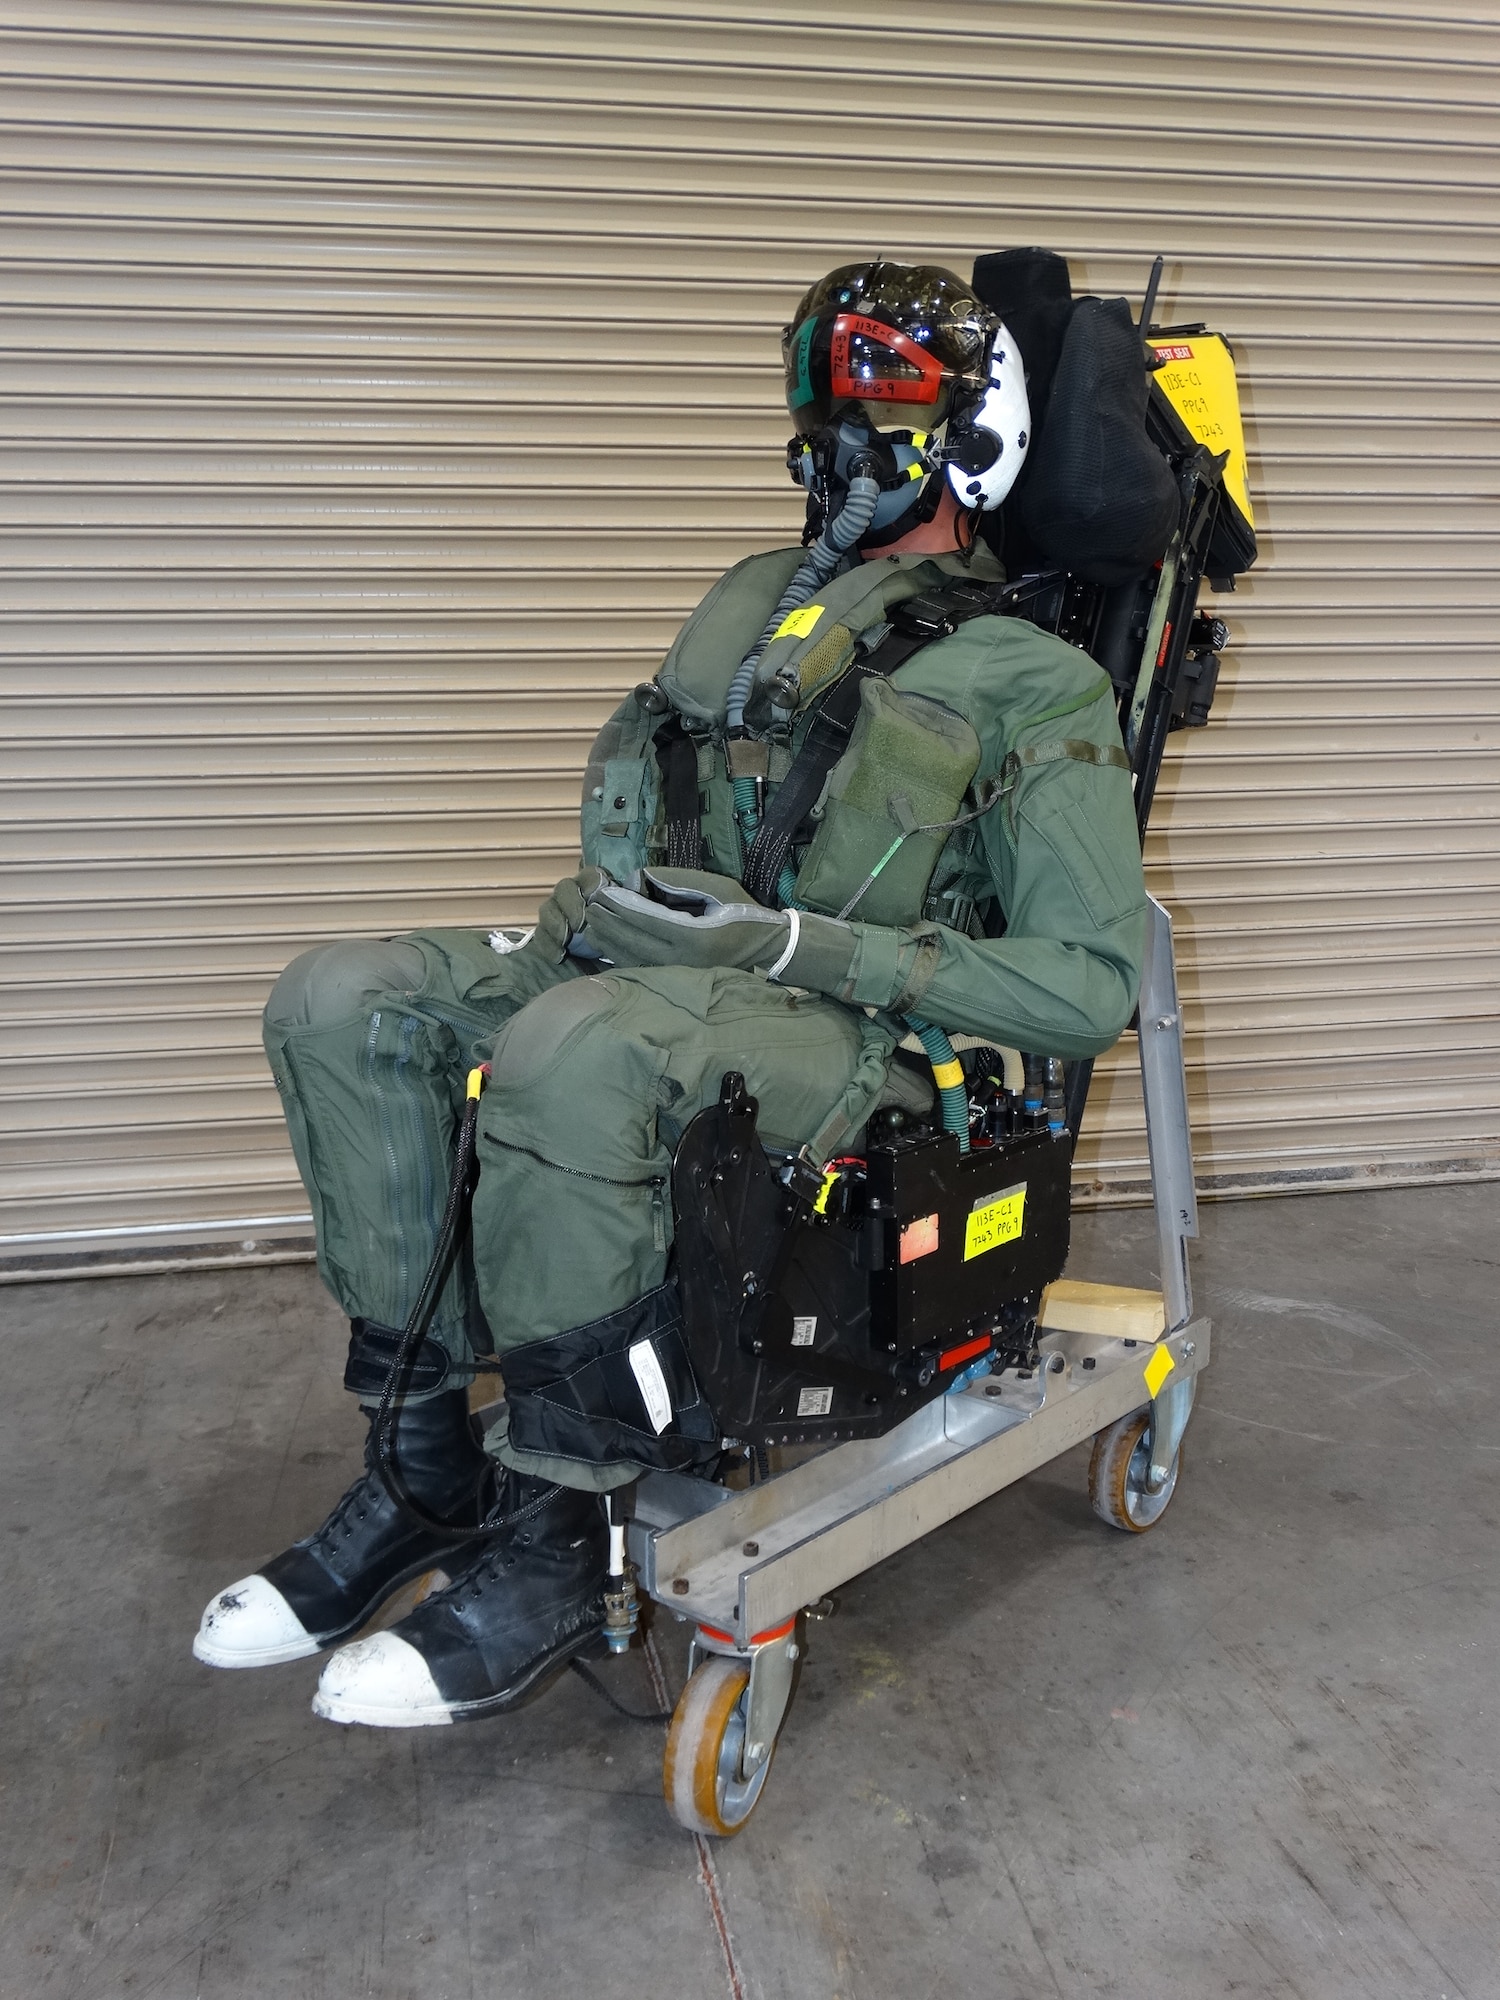 A manikin is integrated with the ejection seat for an F-35 canopy test March 26, 2020, at Holloman Air Force Base, N.M. The build-up, completed by the 846th Test Squadron of the 704th Test Group, Arnold Engineering Development Complex, involved installing the ejection seat explosives and dressing of the manikin prior to installation in the aircraft forebody test apparatus. (U.S. Air Force photo by Lt. Col. Gregory Barber)